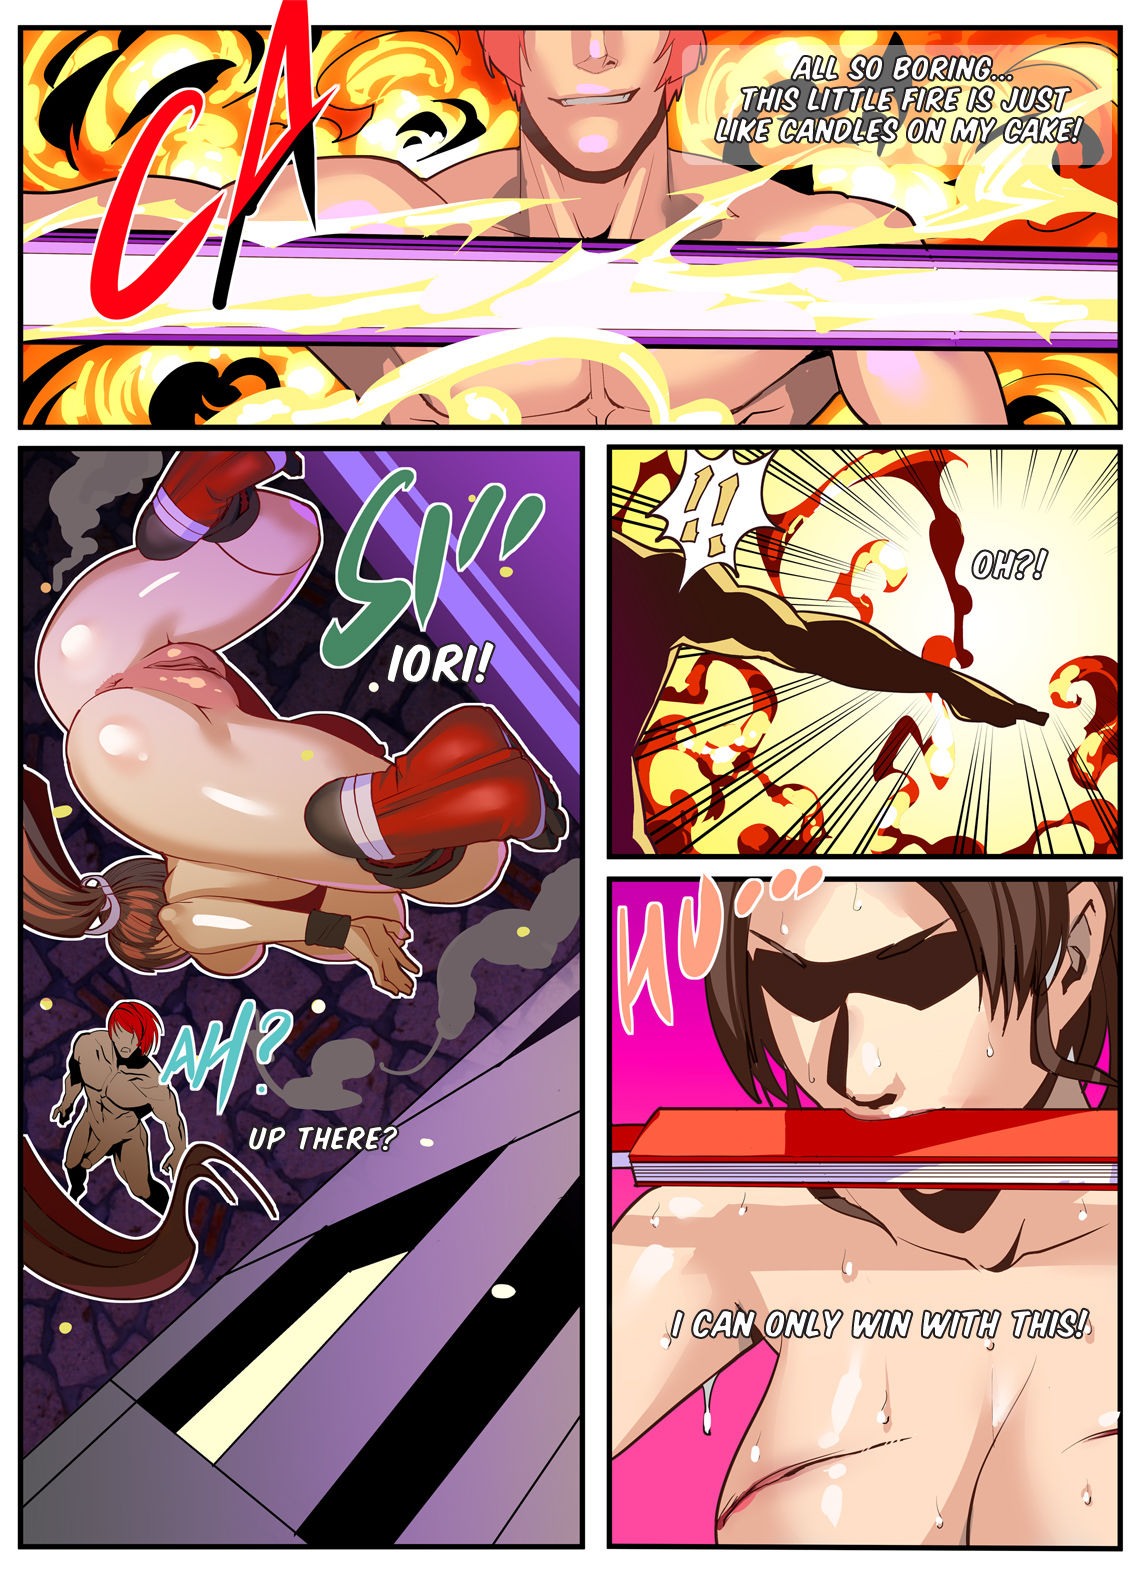 [chunlieater] The Lust of Mai Shiranui (King of Fighters) [English] [Yorkchoi & Twist] page 28 full